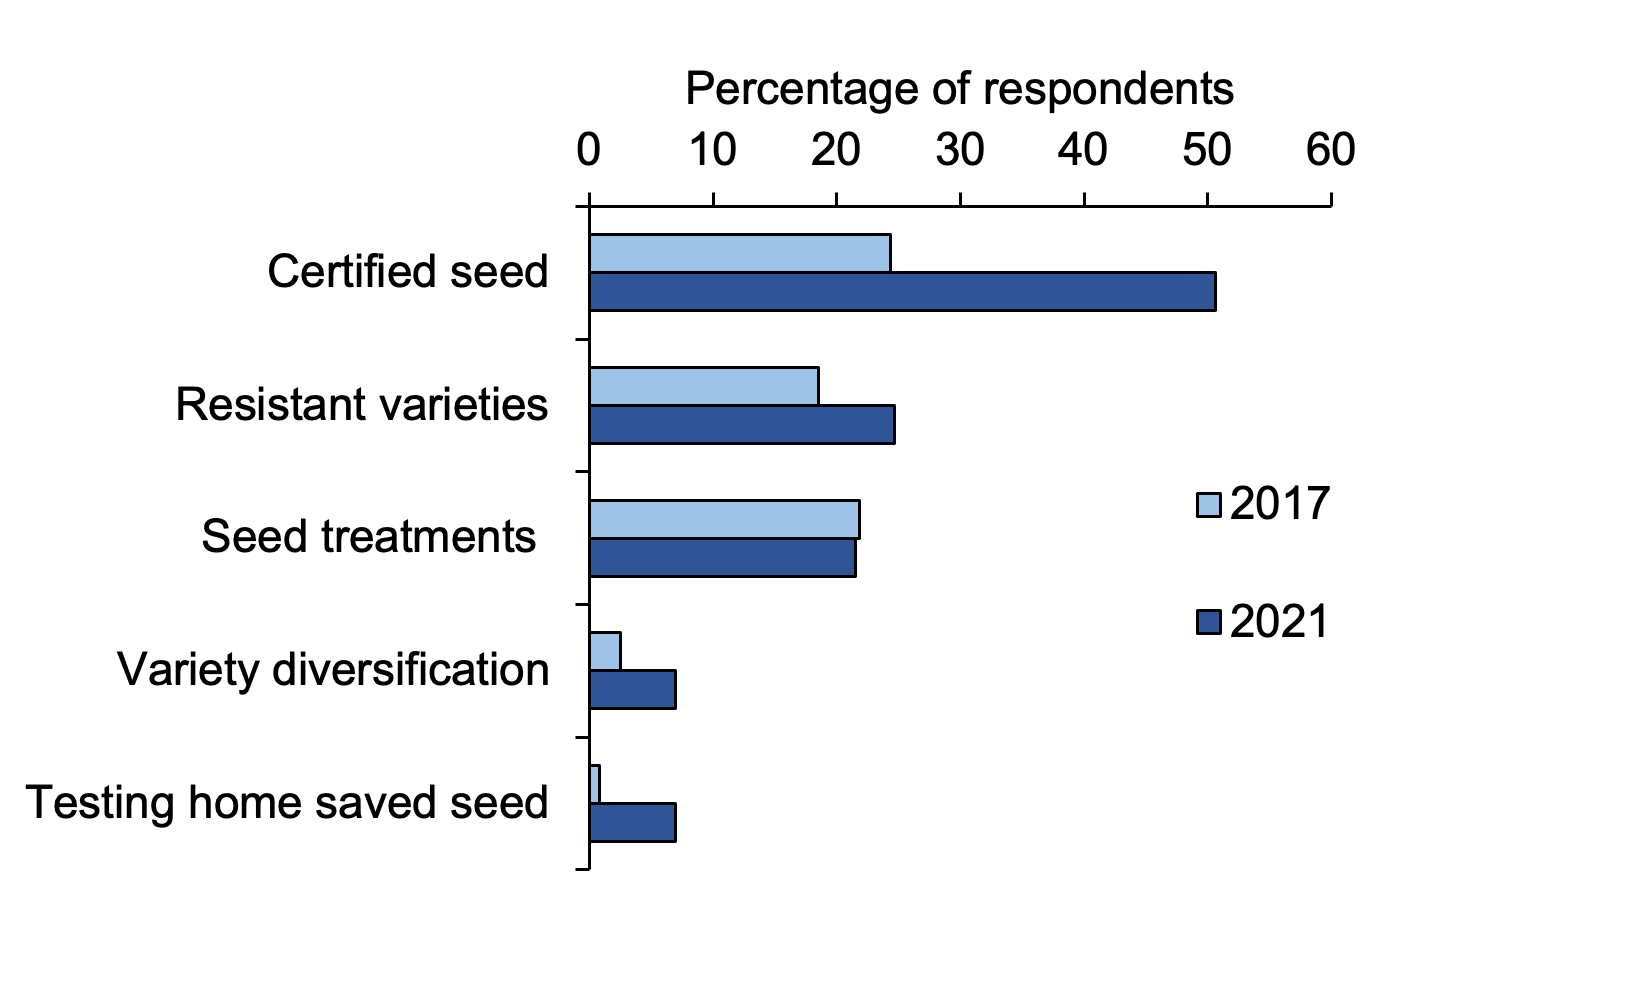 IPM: Bar chart of percentage responses to questions about variety and seed choice where certified seed is the most popular response in 2021.